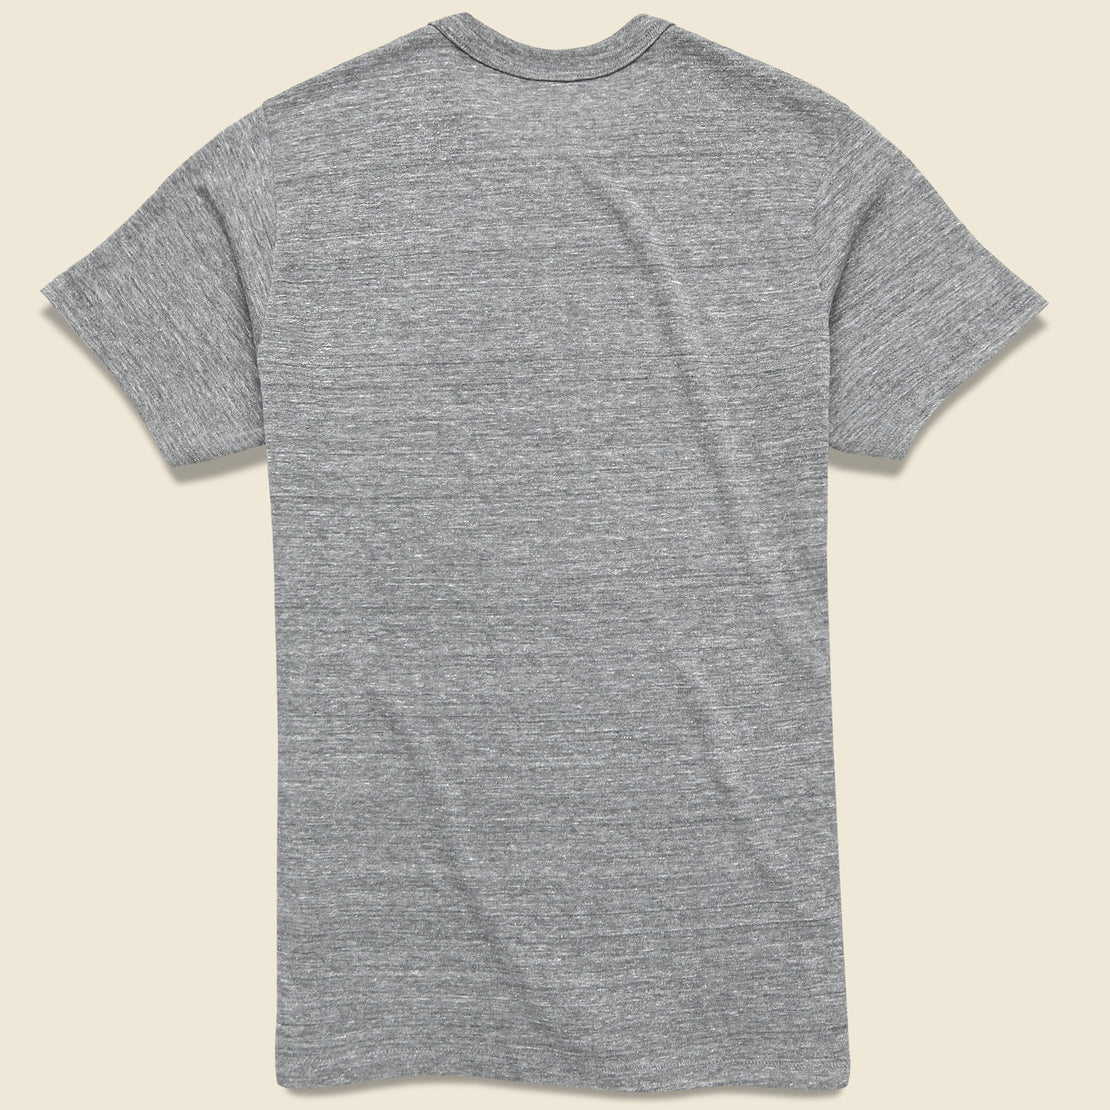 Graphic Tee - Buffalo - STAG - STAG Provisions - Tops - S/S Tee - Graphic